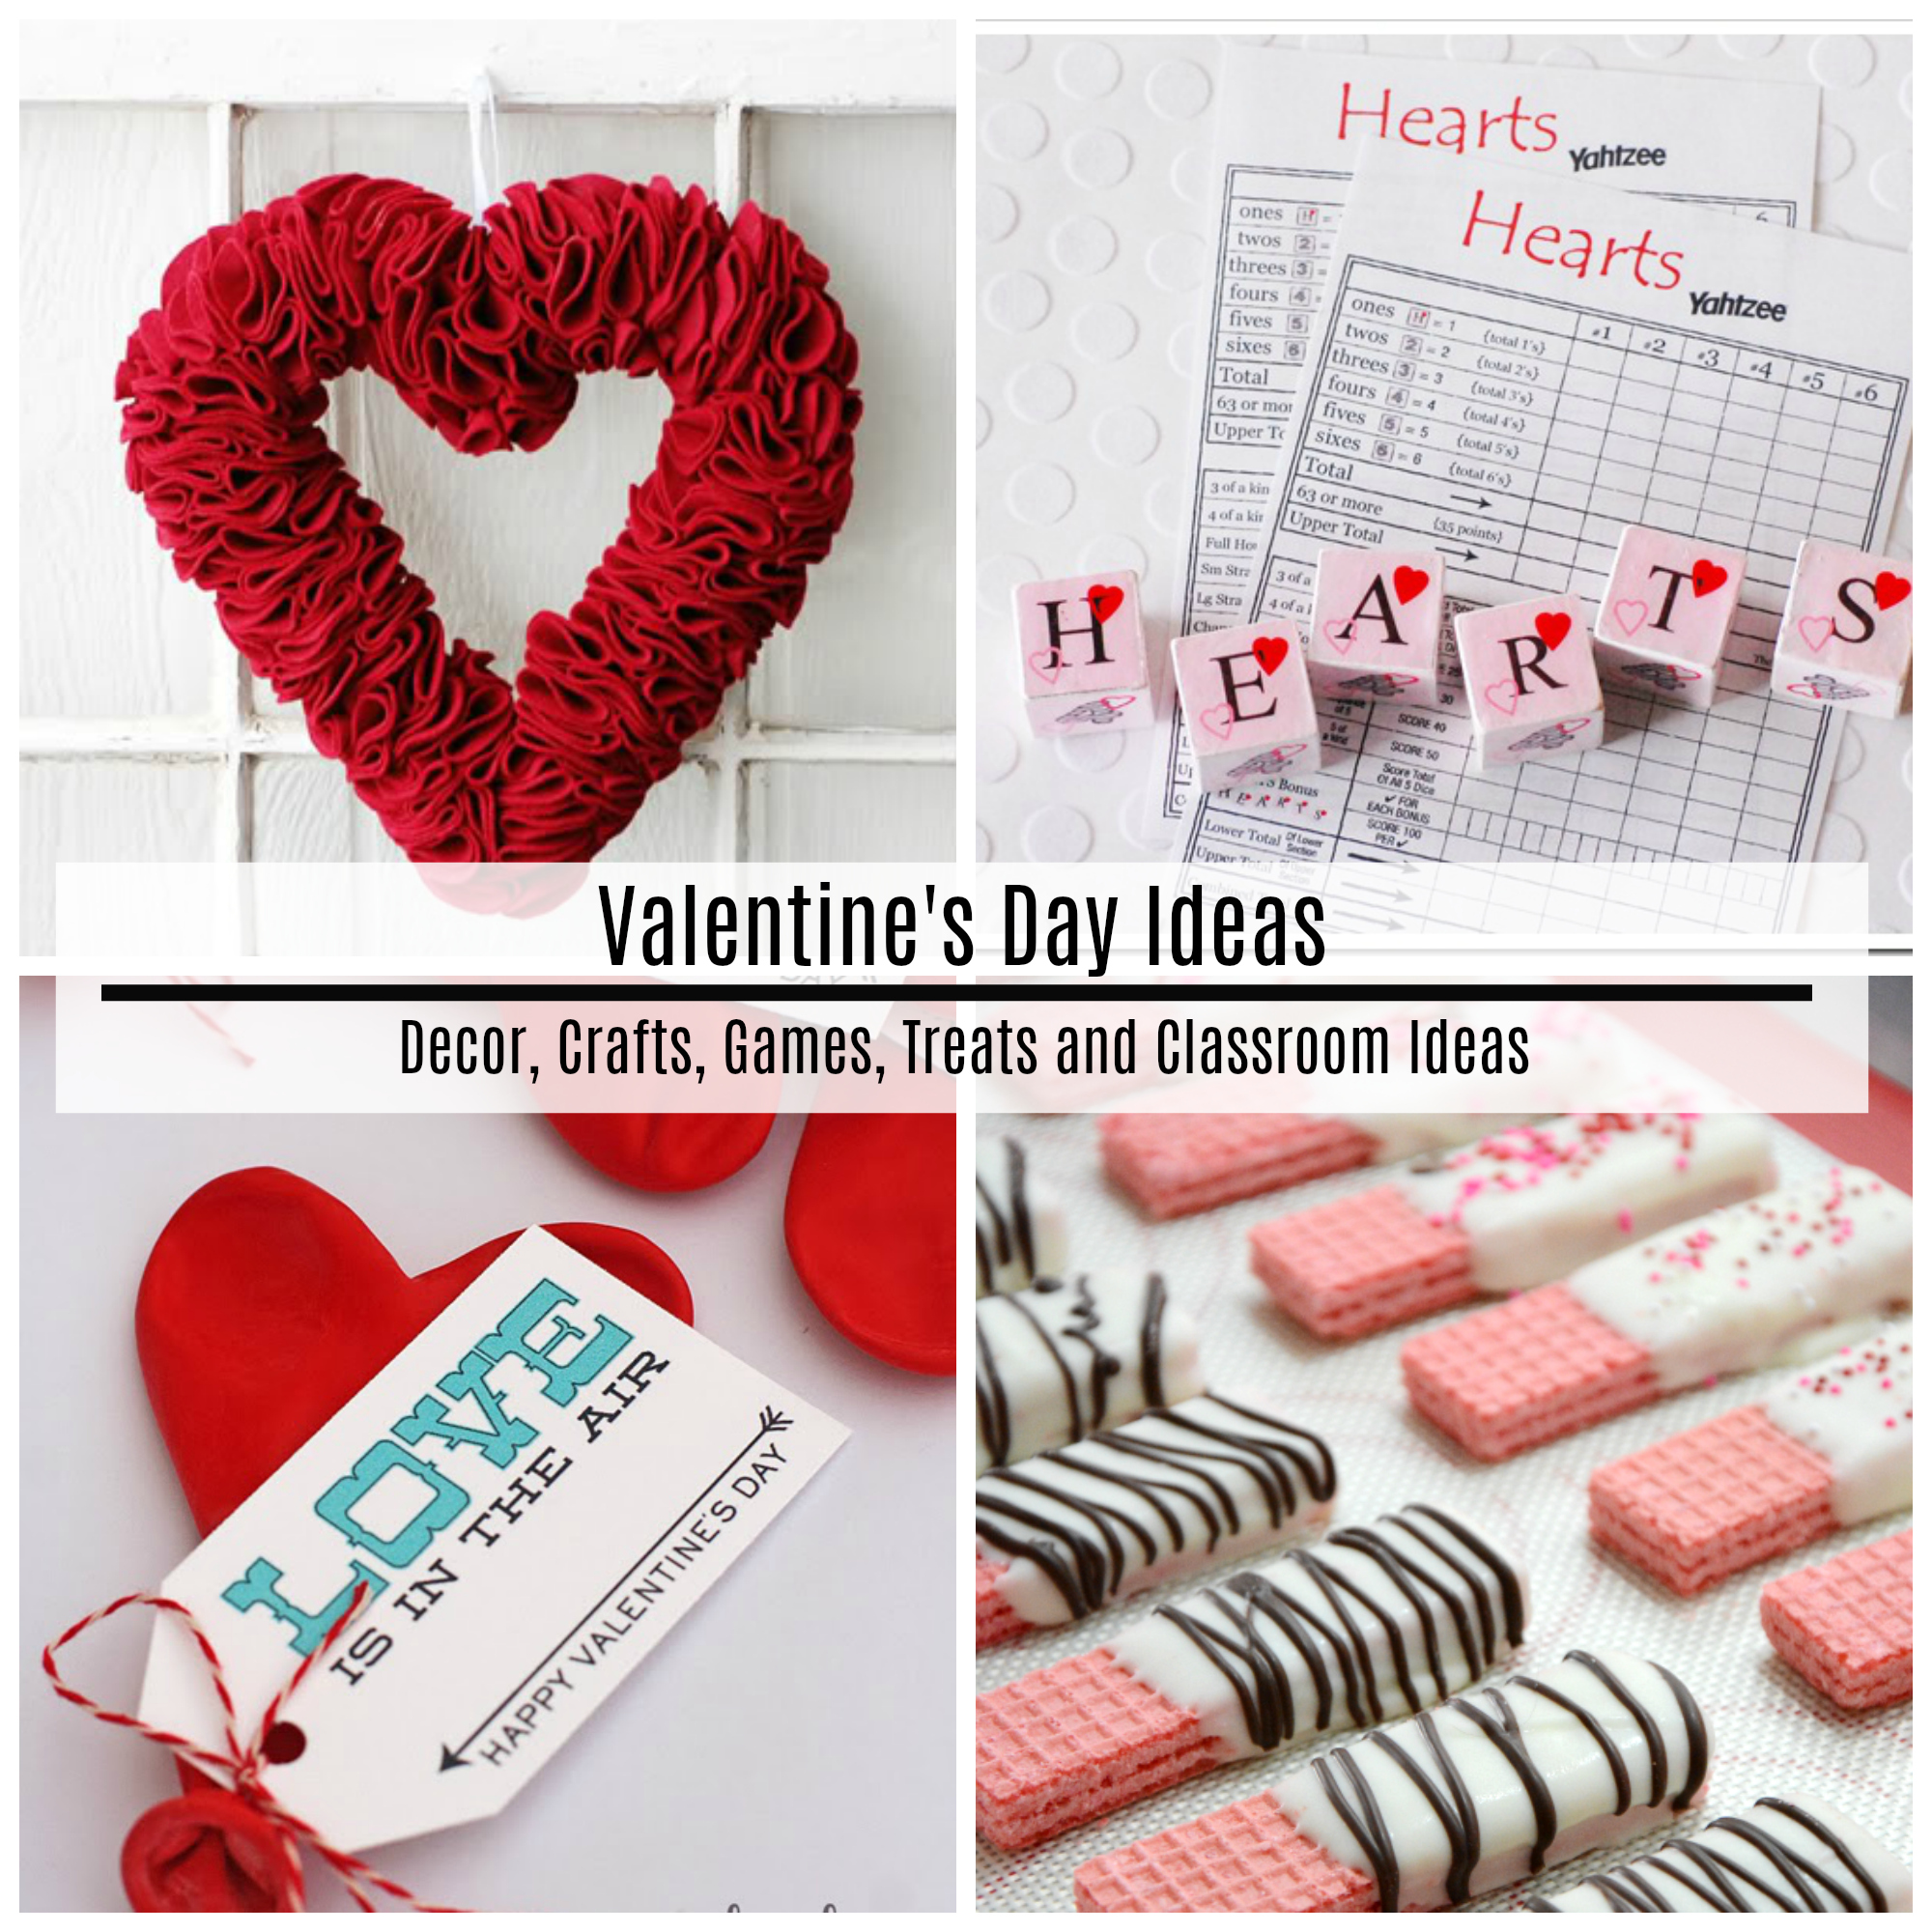 Easy Valentines from the Teacher - TheRoomMom